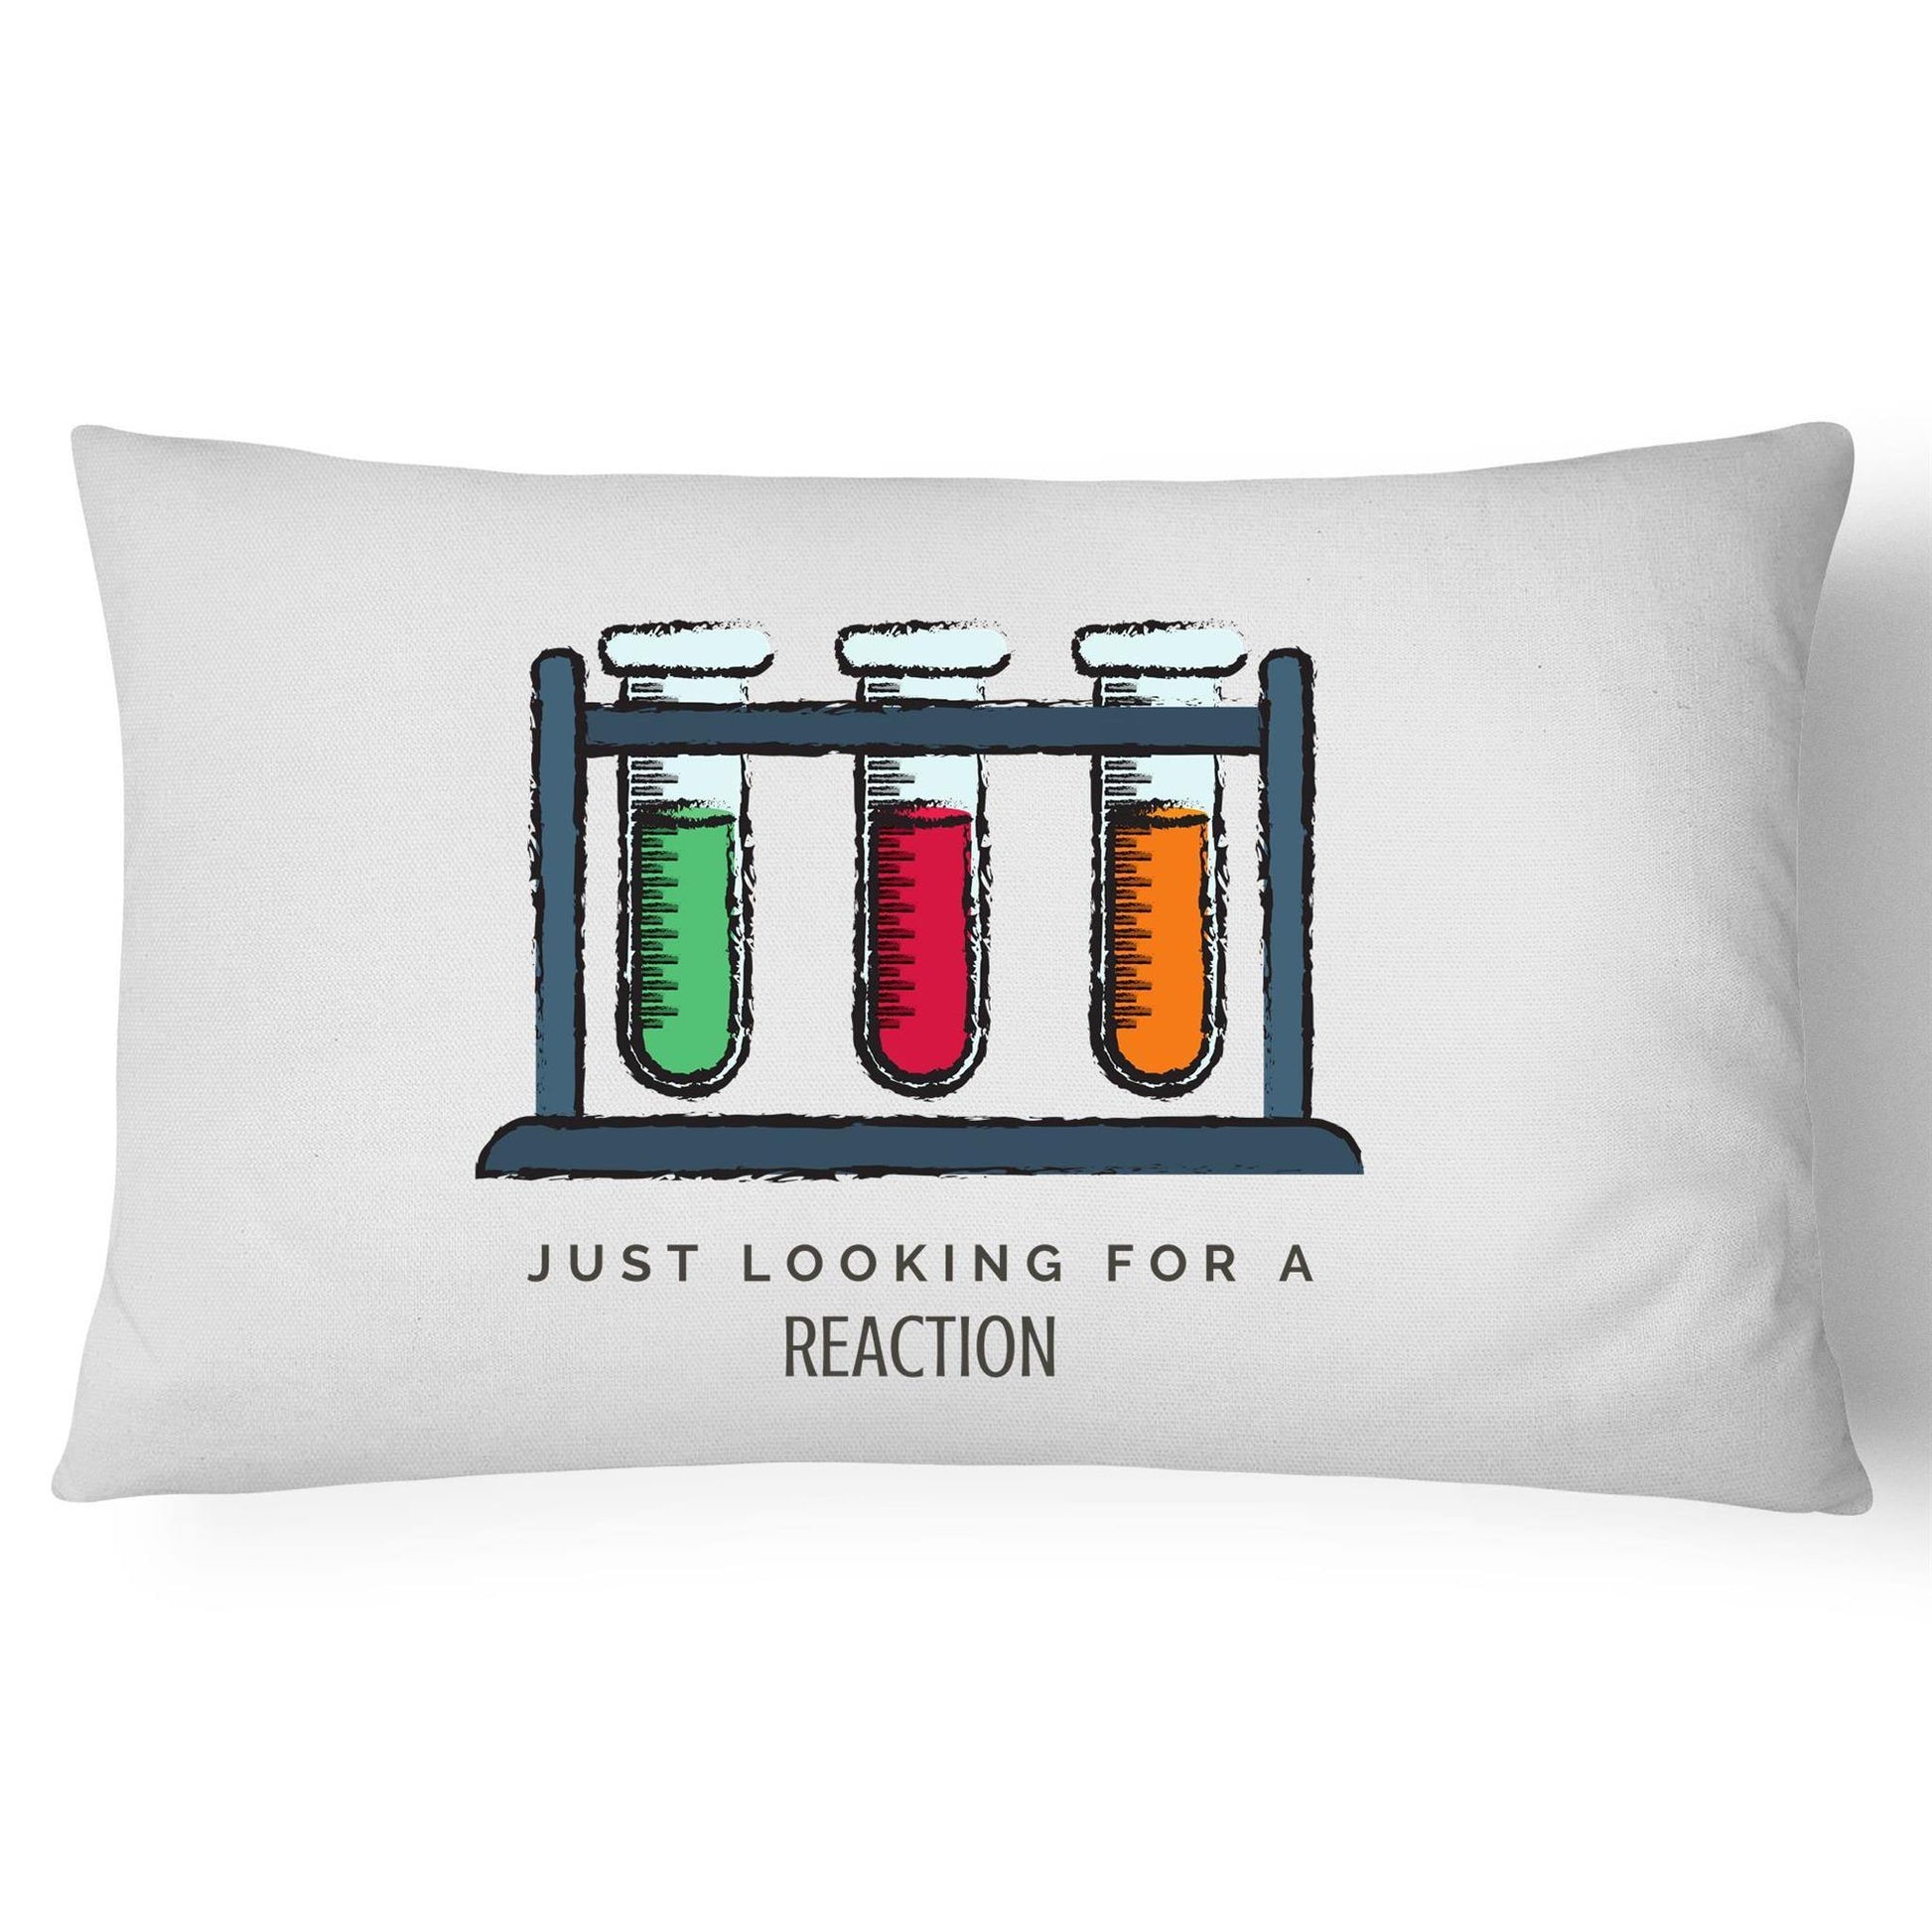 Test Tube, Just Looking For A Reaction - 100% Cotton Pillow Case White One-Size Pillow Case kids Science